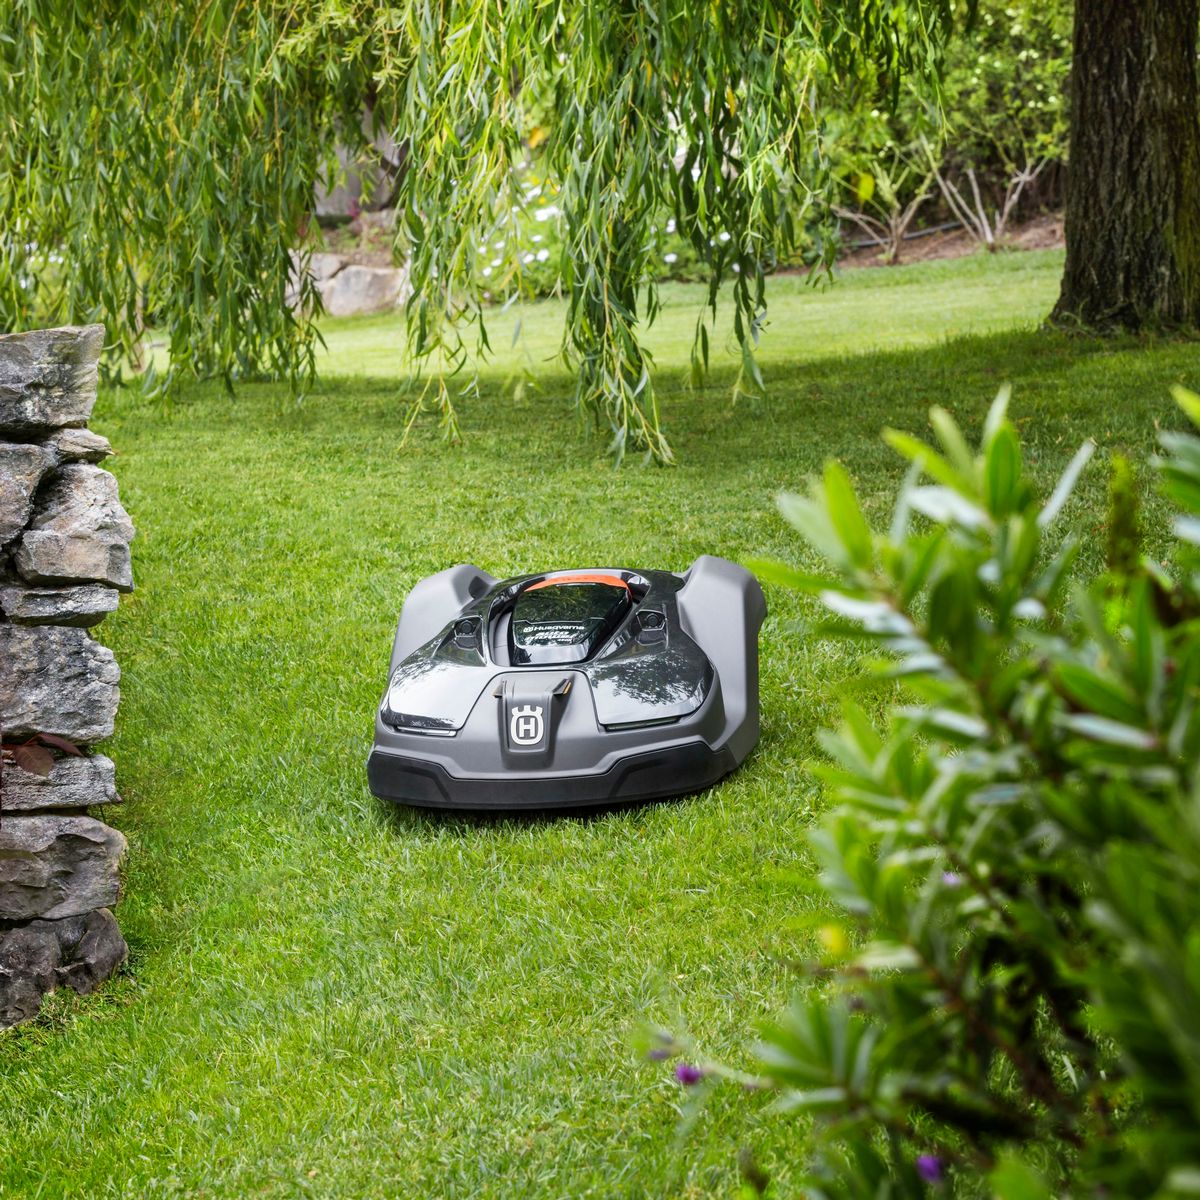 How to Choose a Lawn Mower